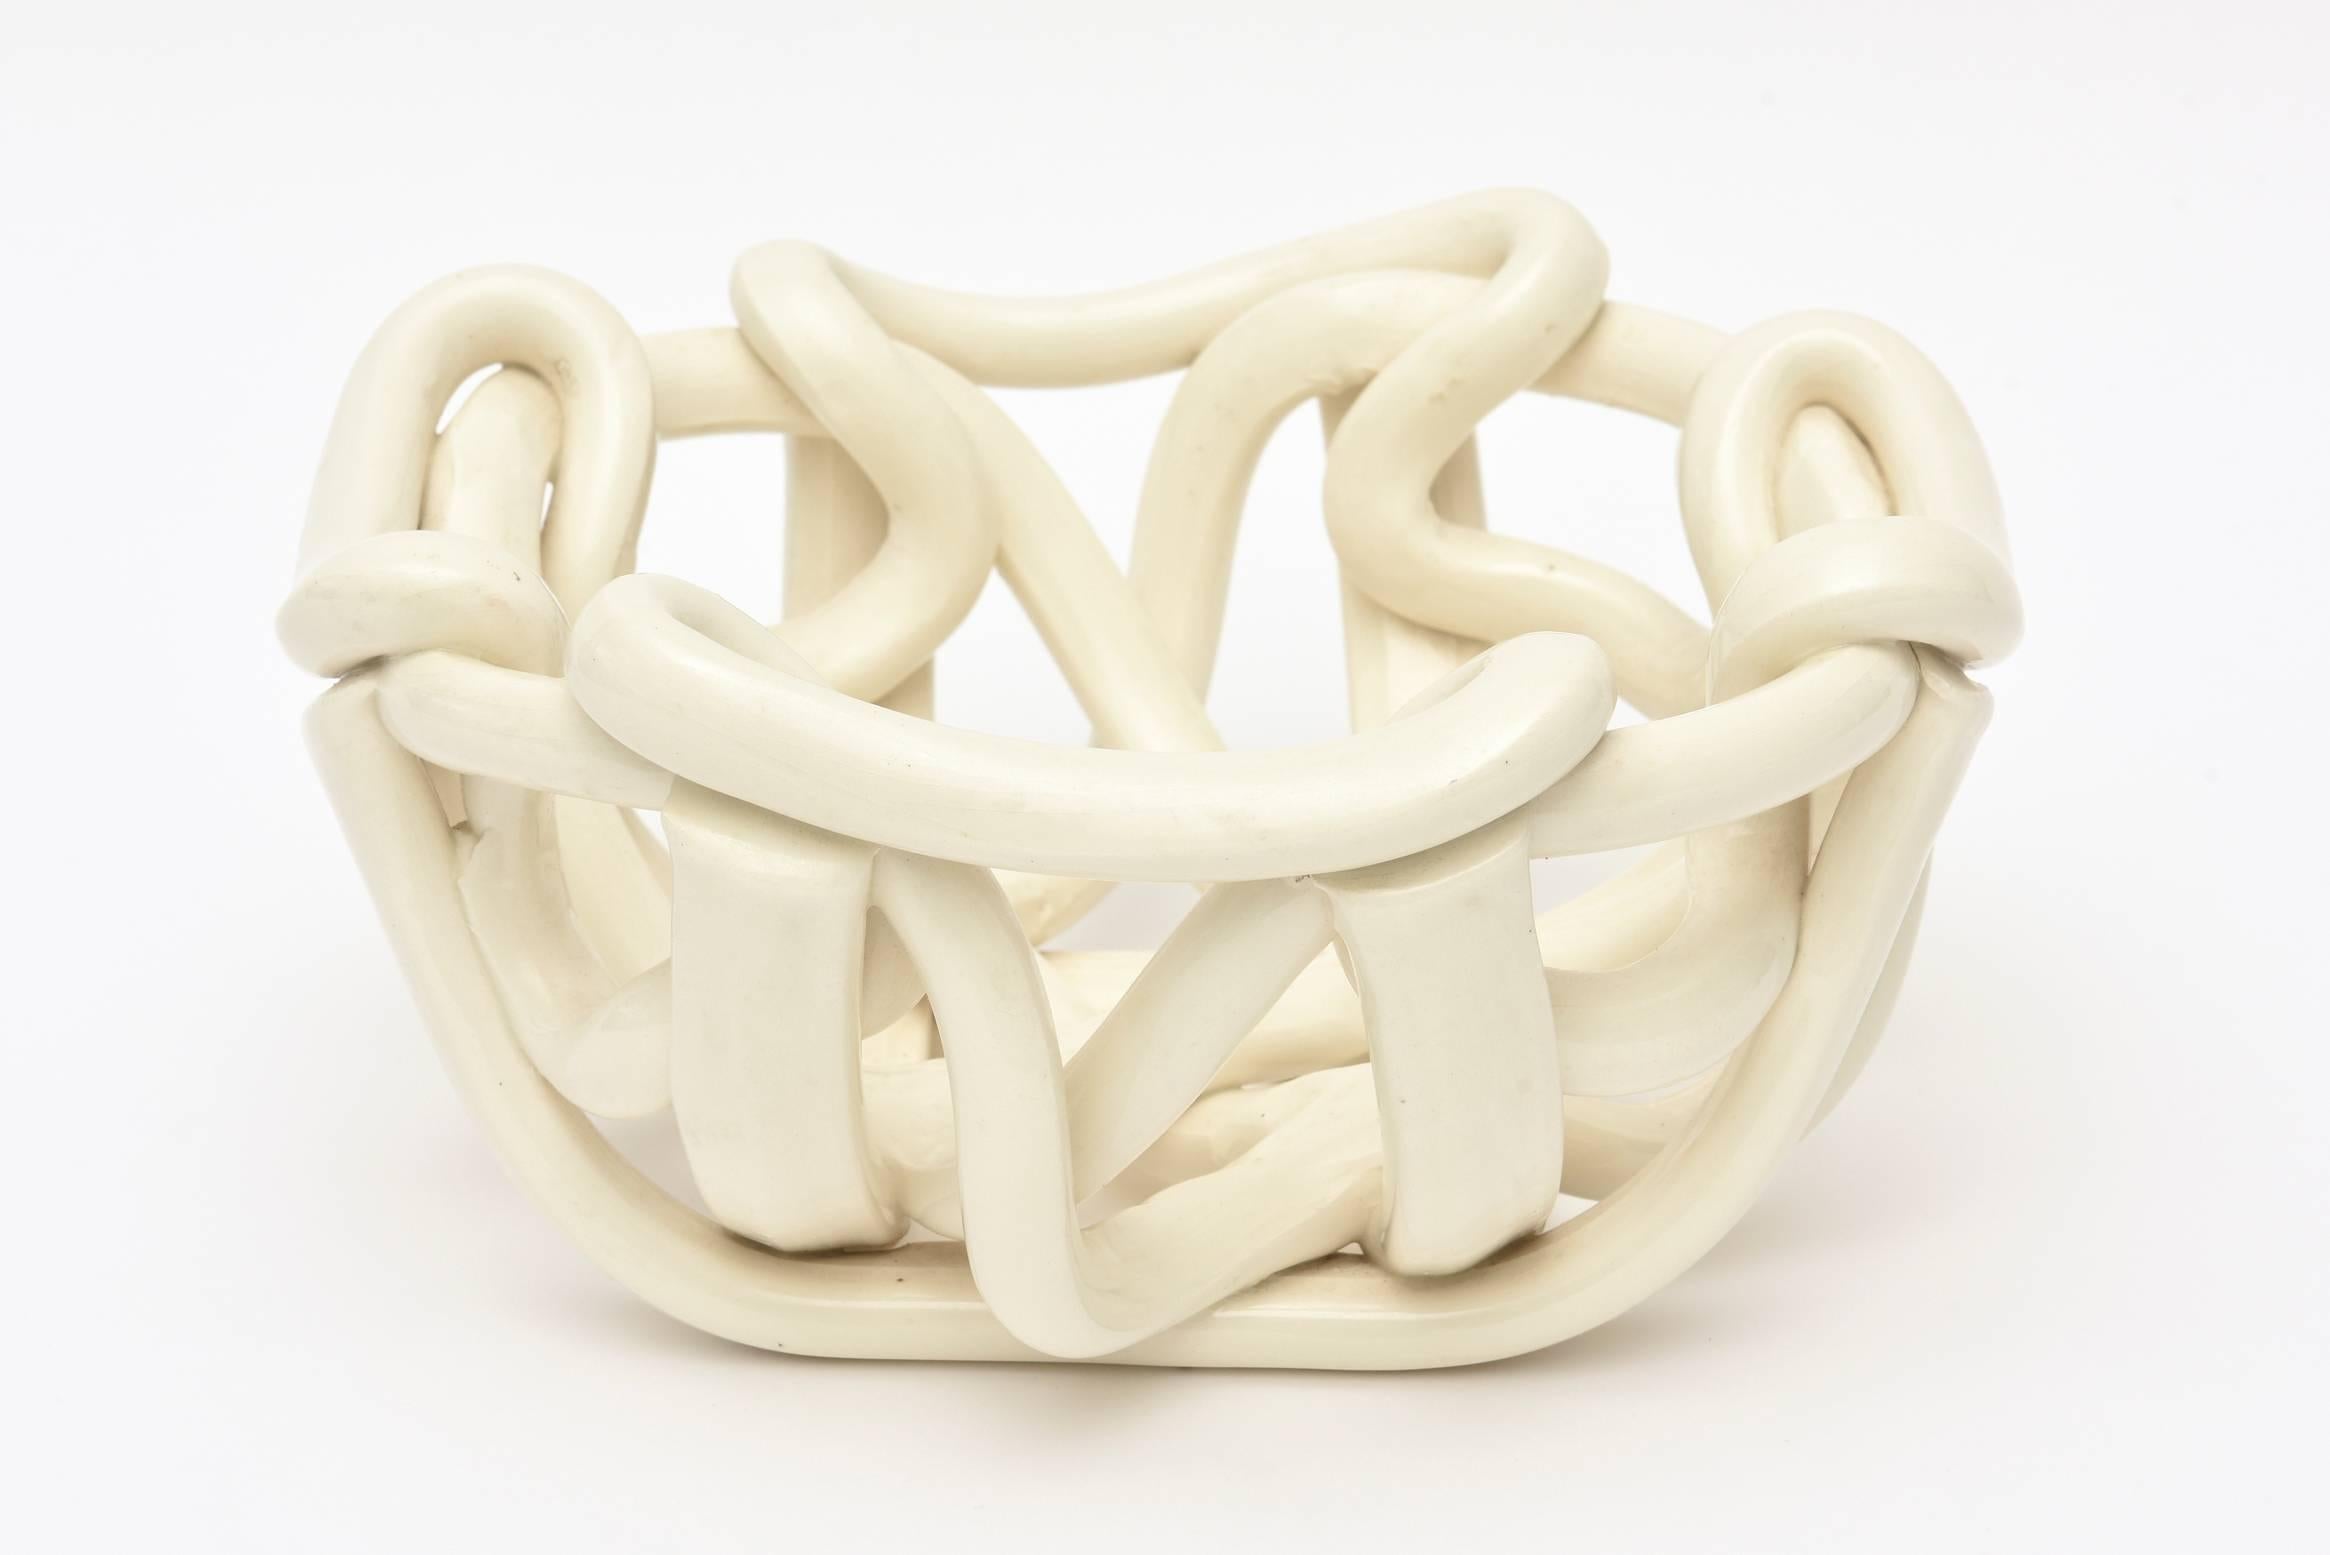 This wonderful vintage twisted and sculptural Italian ceramic bowl is off white to cream. Each angle and way you look at it changes a bit of twisted form. Organic modern.
It is sculpture and ceramic form and a bowl; utilitarian and